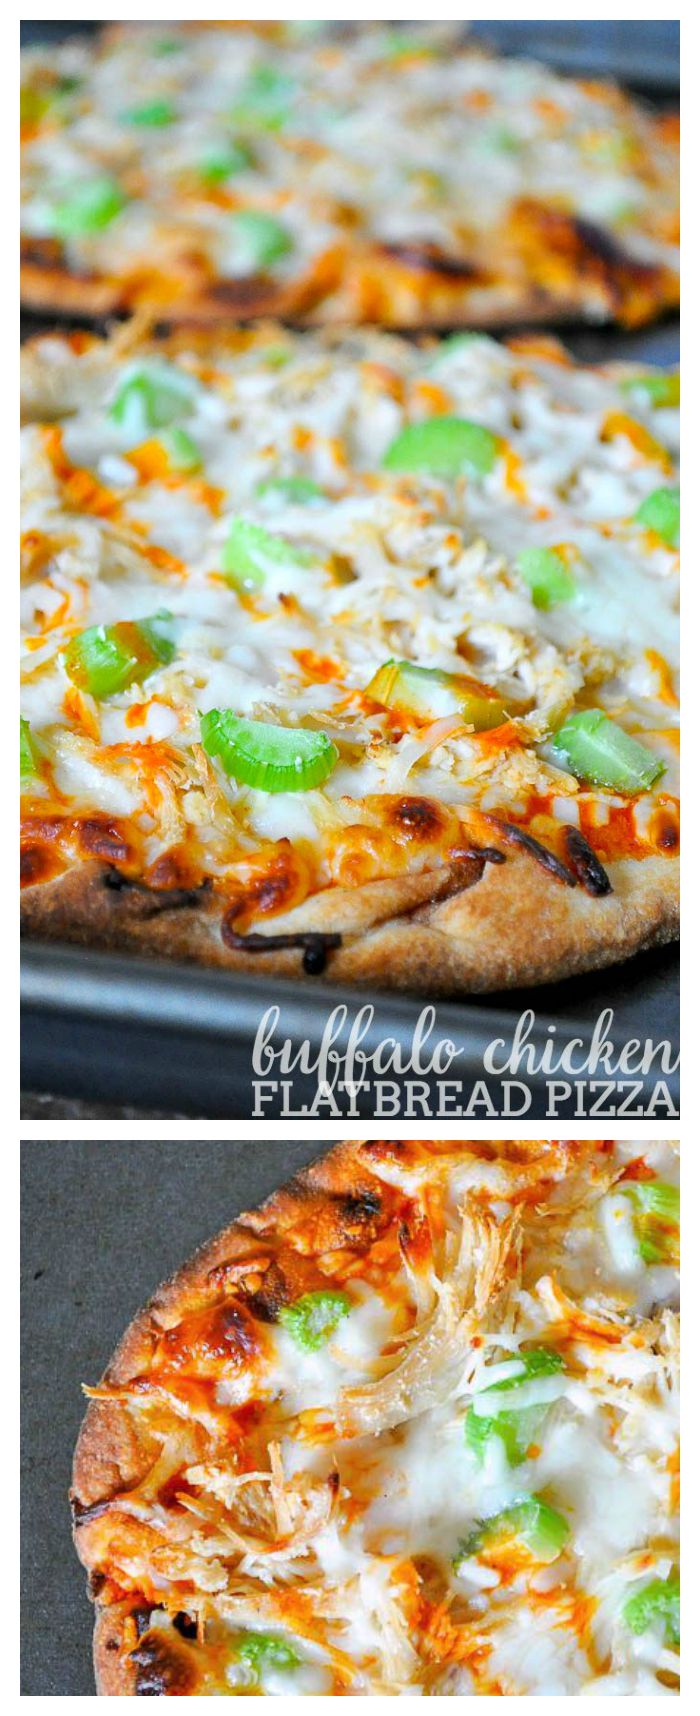 Enjoy delicious Buffalo Chicken Flatbread Pizza in under 20 minutes! Makes a great quick lunch or dinner idea and a crowd-pleasing game day appetizer. | The Love Nerds